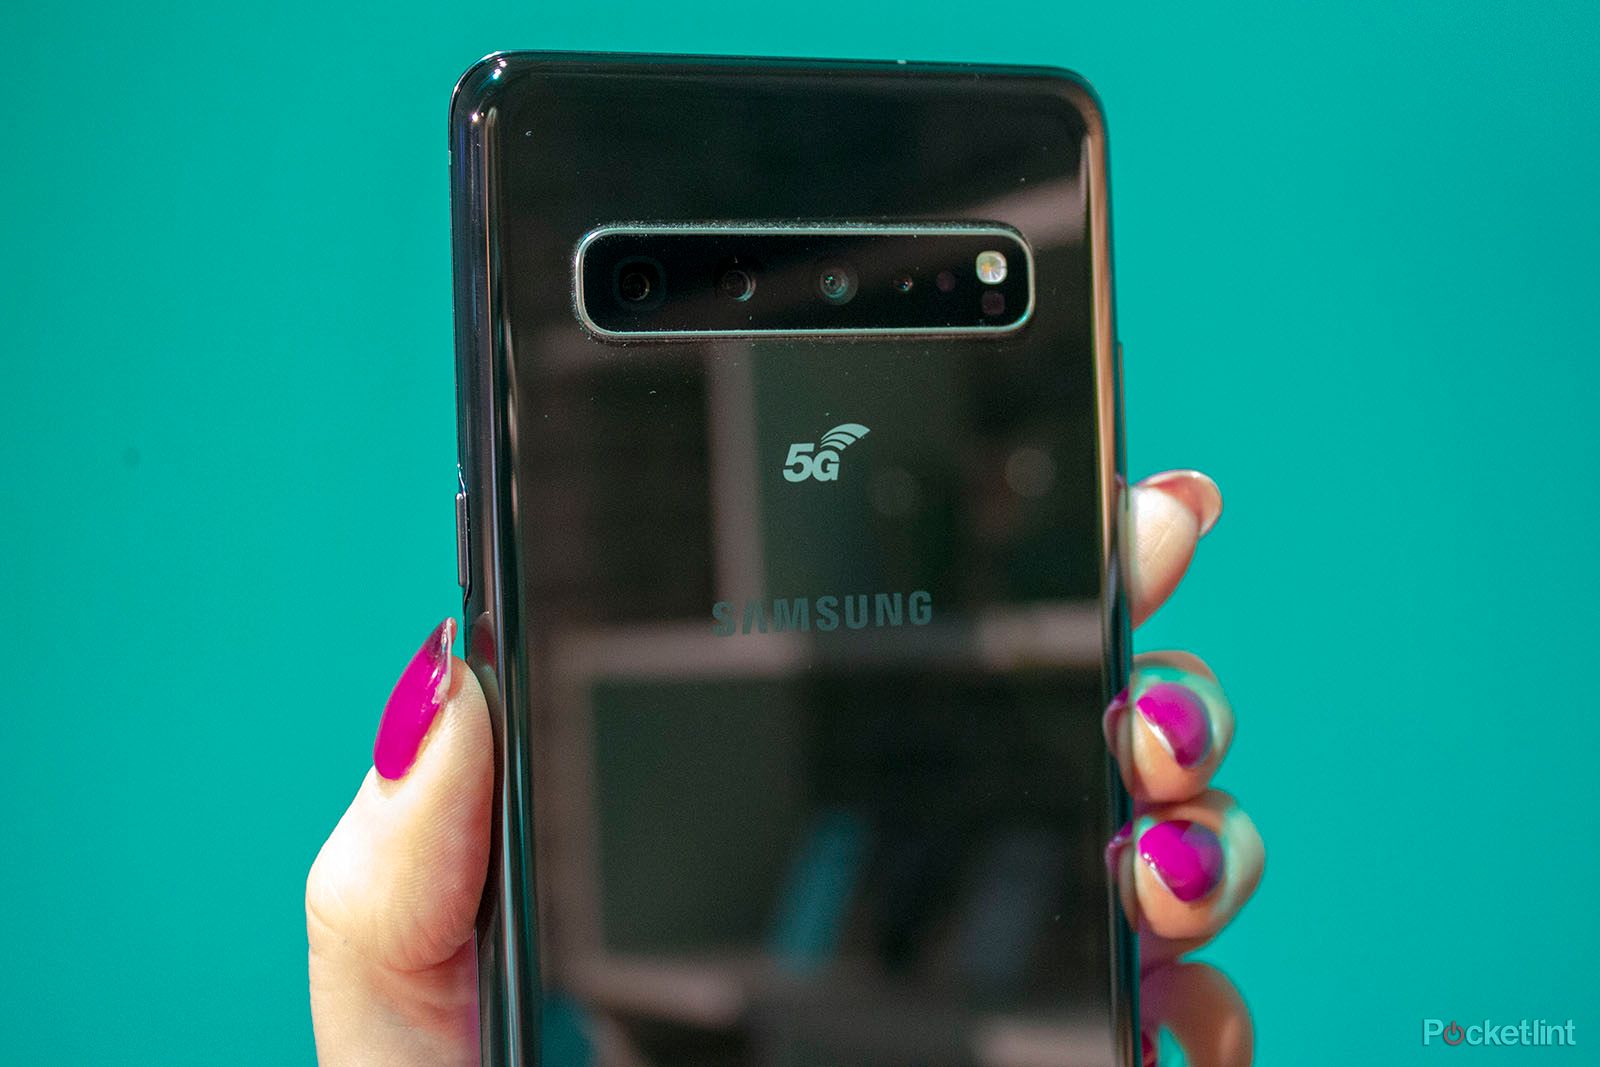 Samsung Galaxy X confirmed to be Galaxy S10 5G arriving summer 2019 image 1